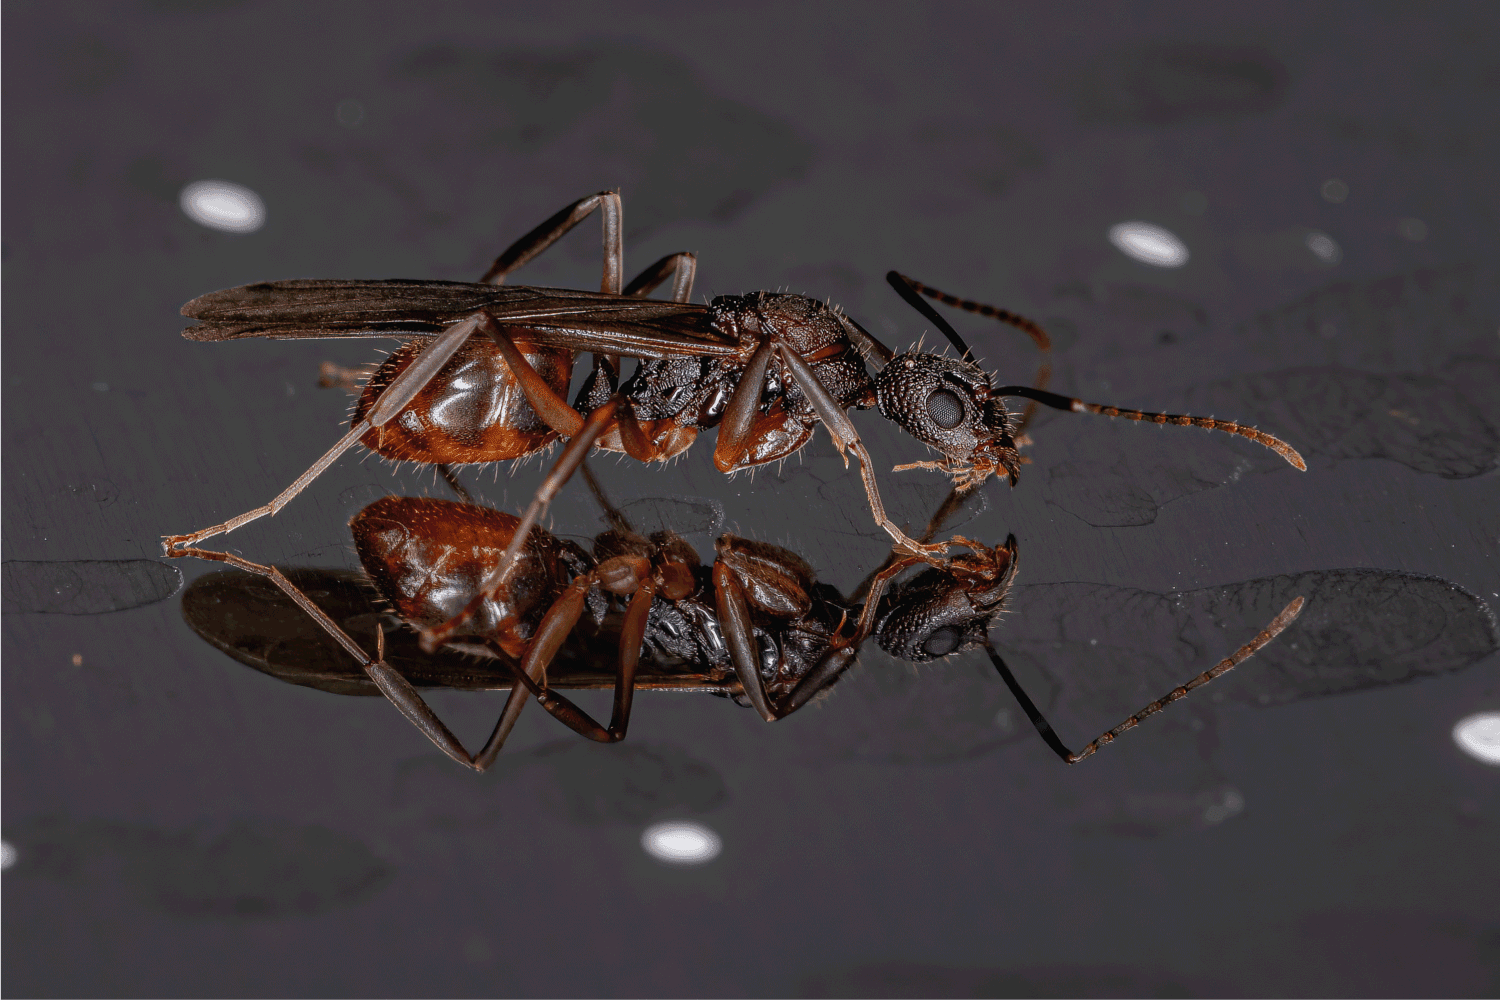 Adult Female Winged Odorous Ant Queen of the Genus Dolichoderus